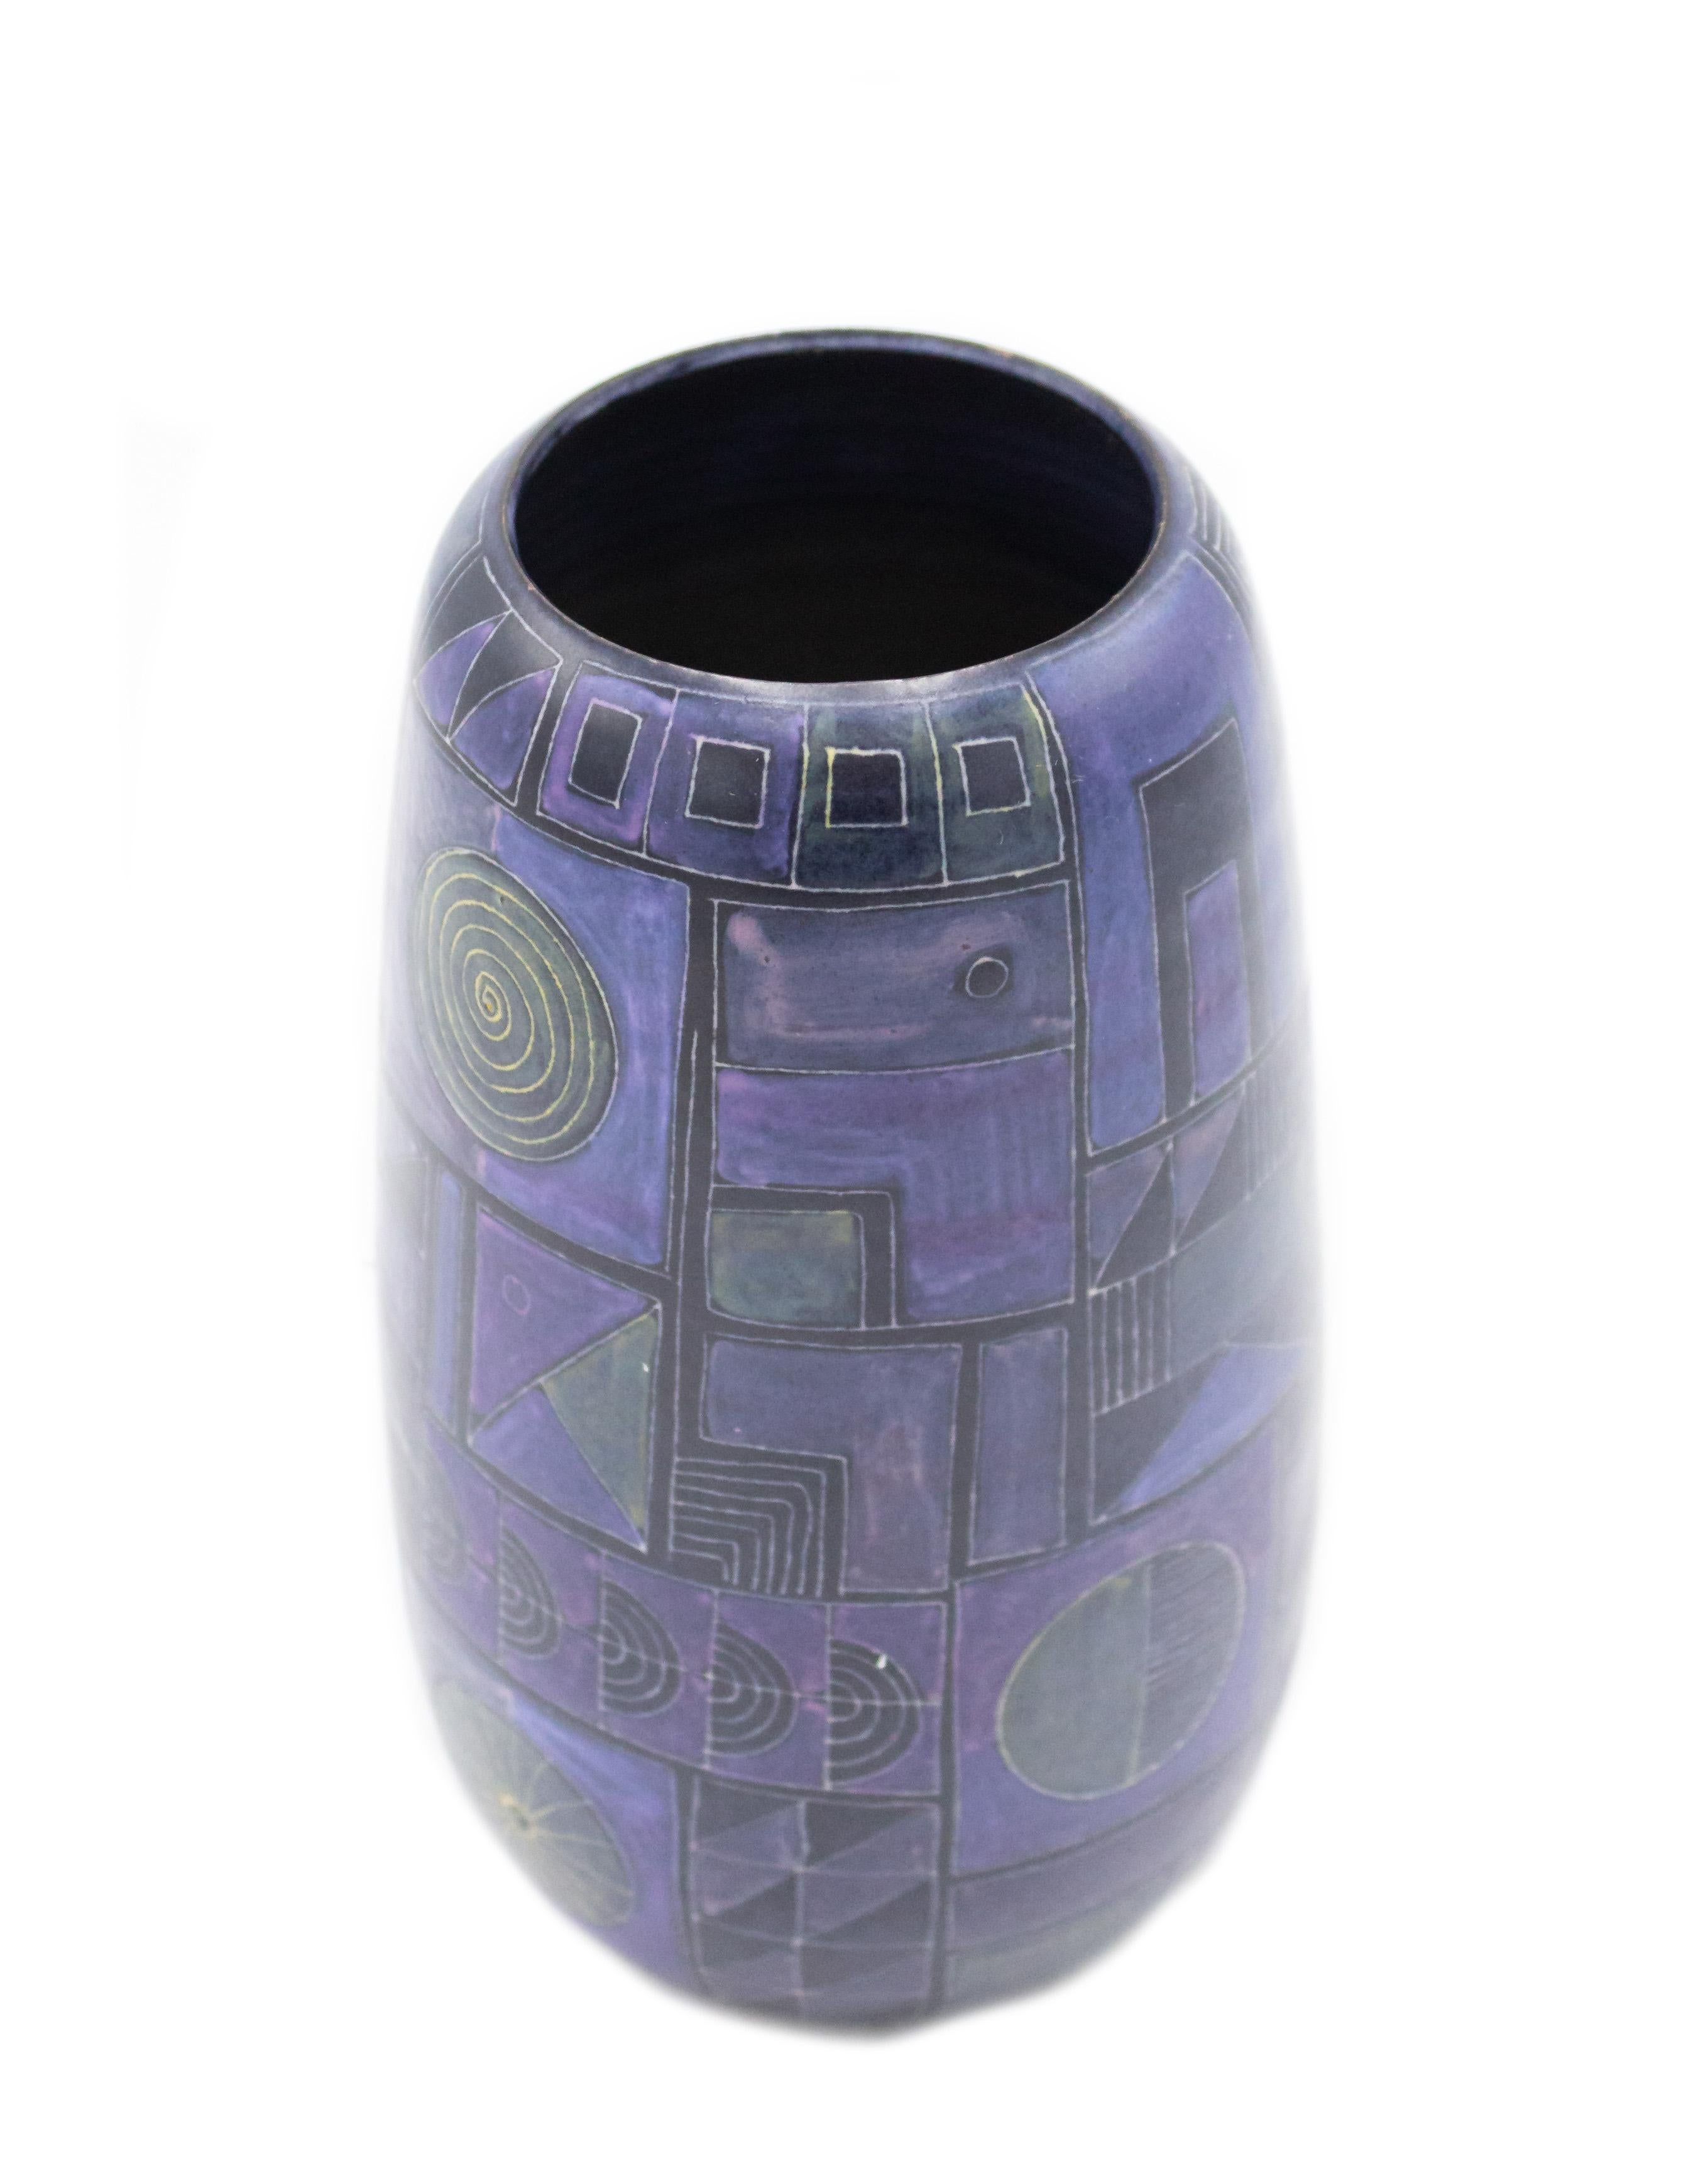 Art Deco (possibly French) cylindrical shaped blue and purple vase with a geometric design.